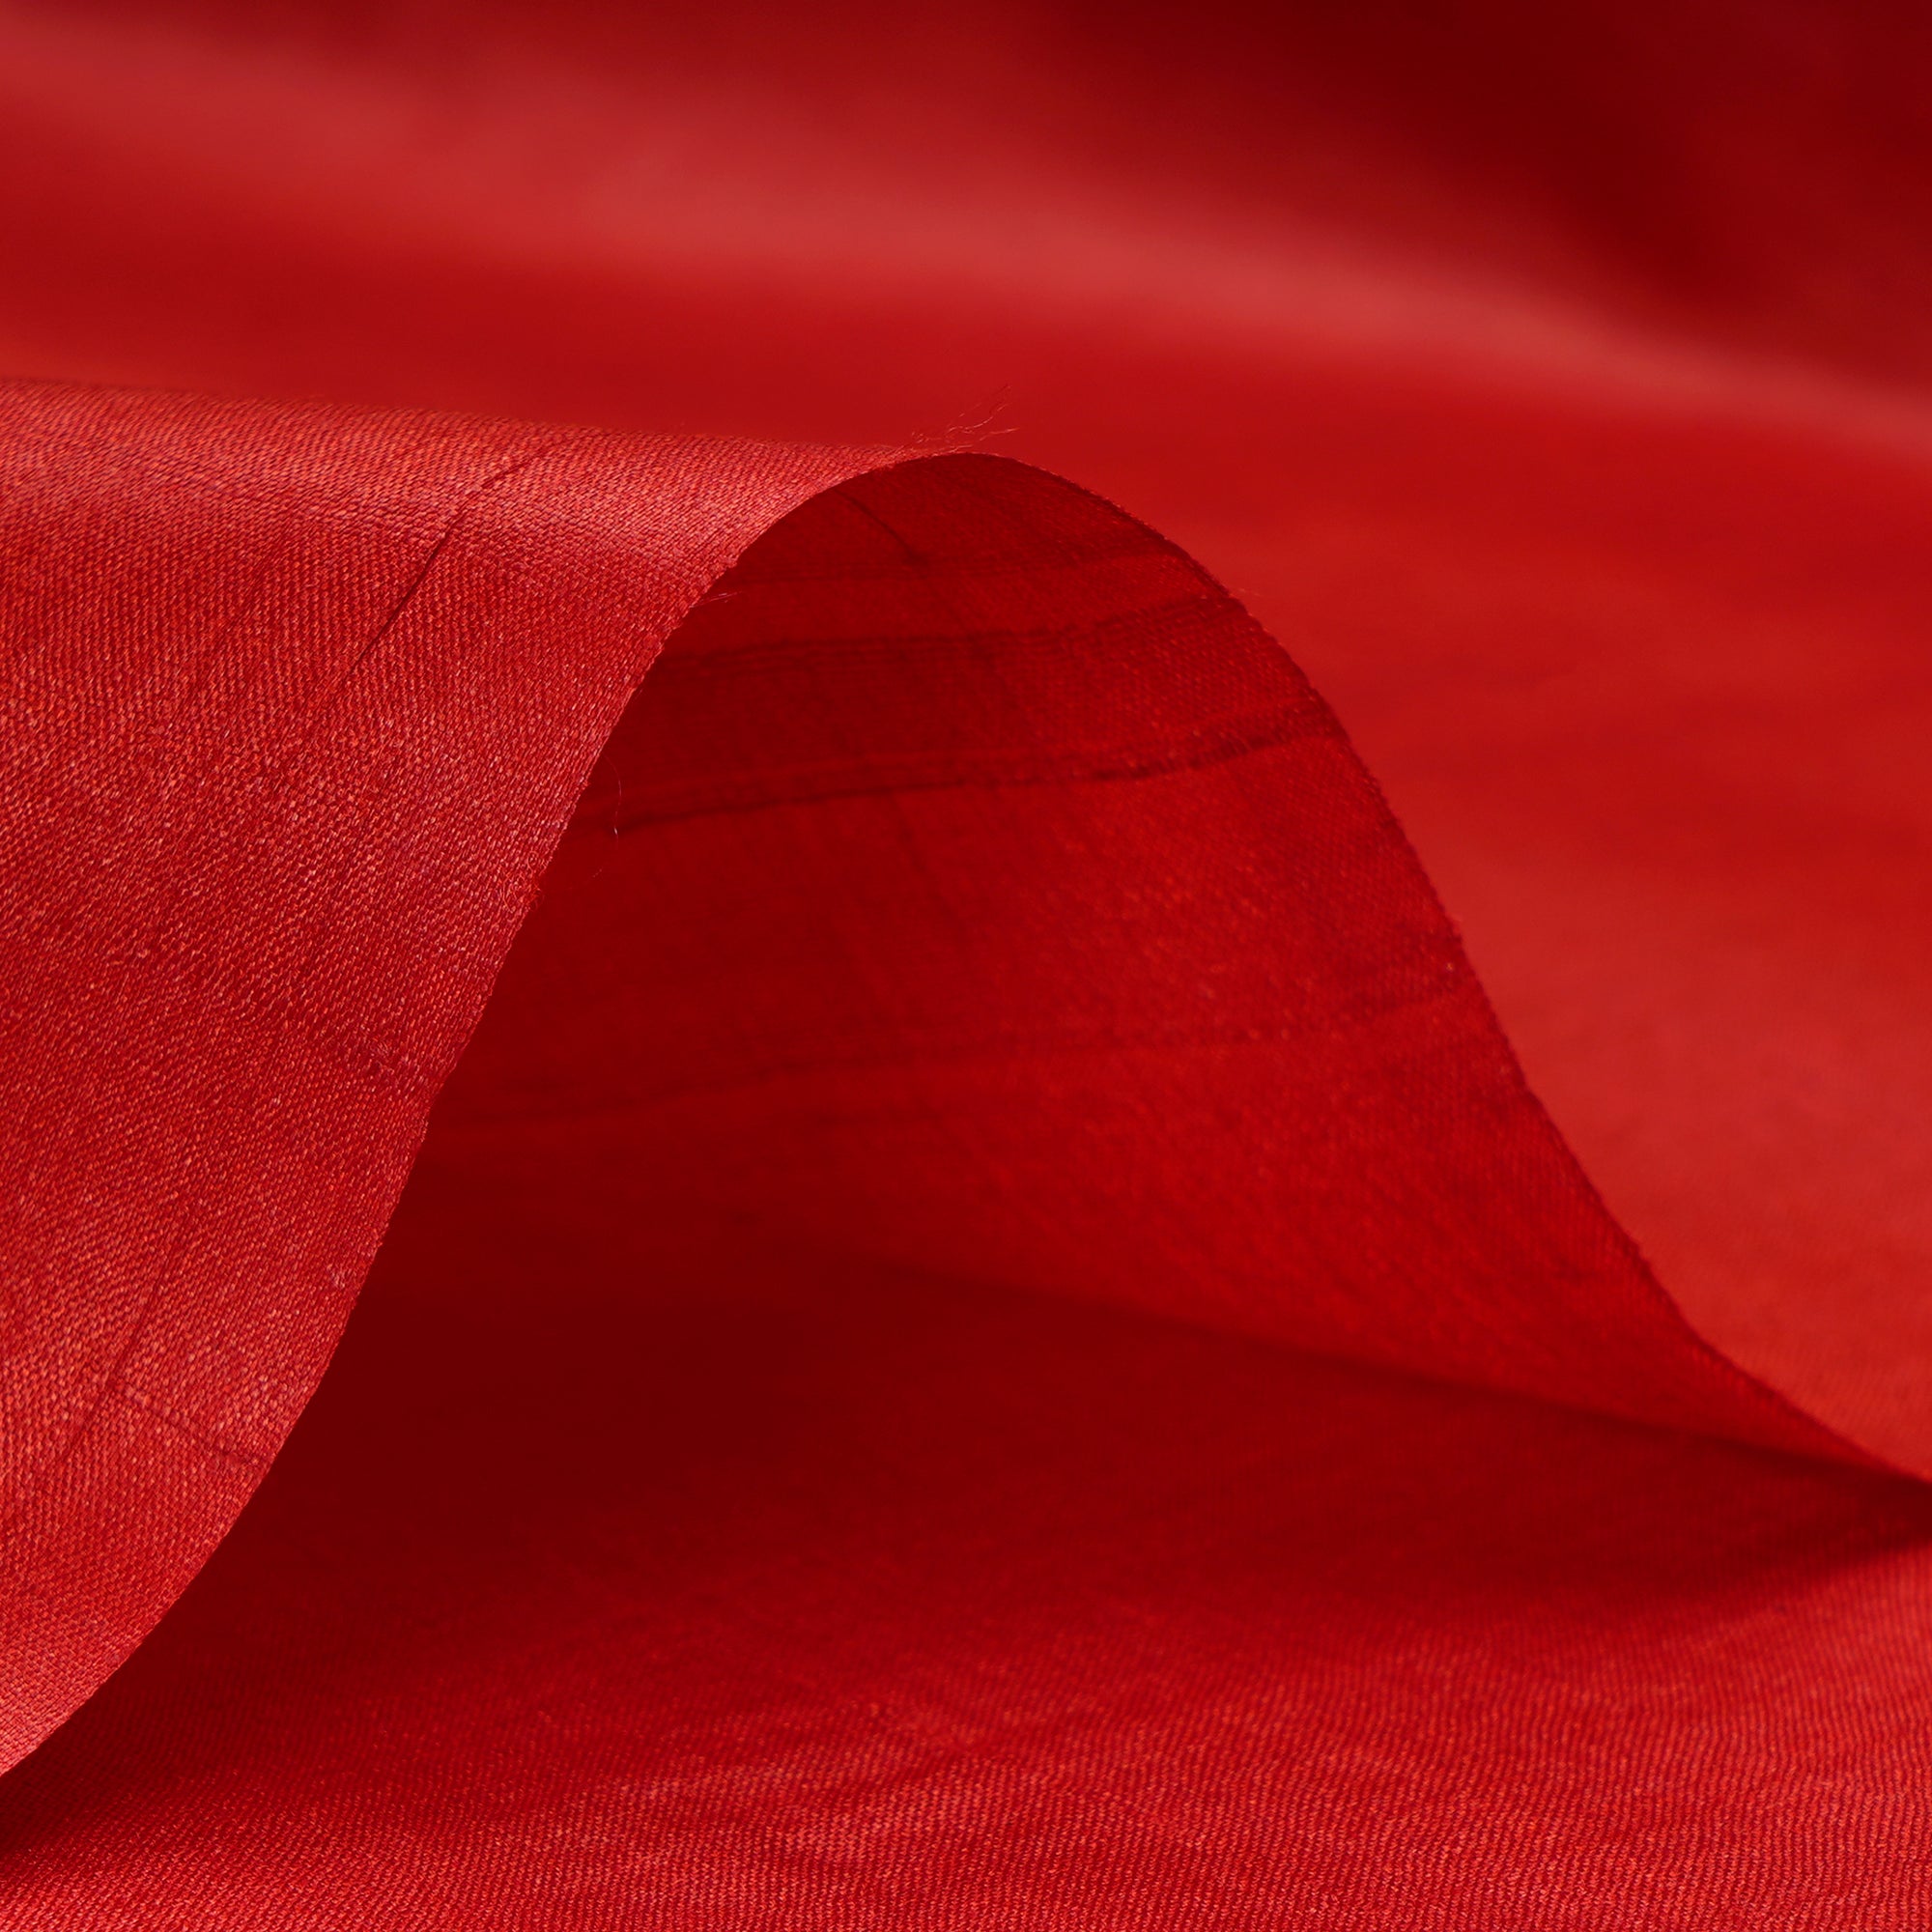 Red Alert Piece Dyed Pure Tussar Silk Fabric